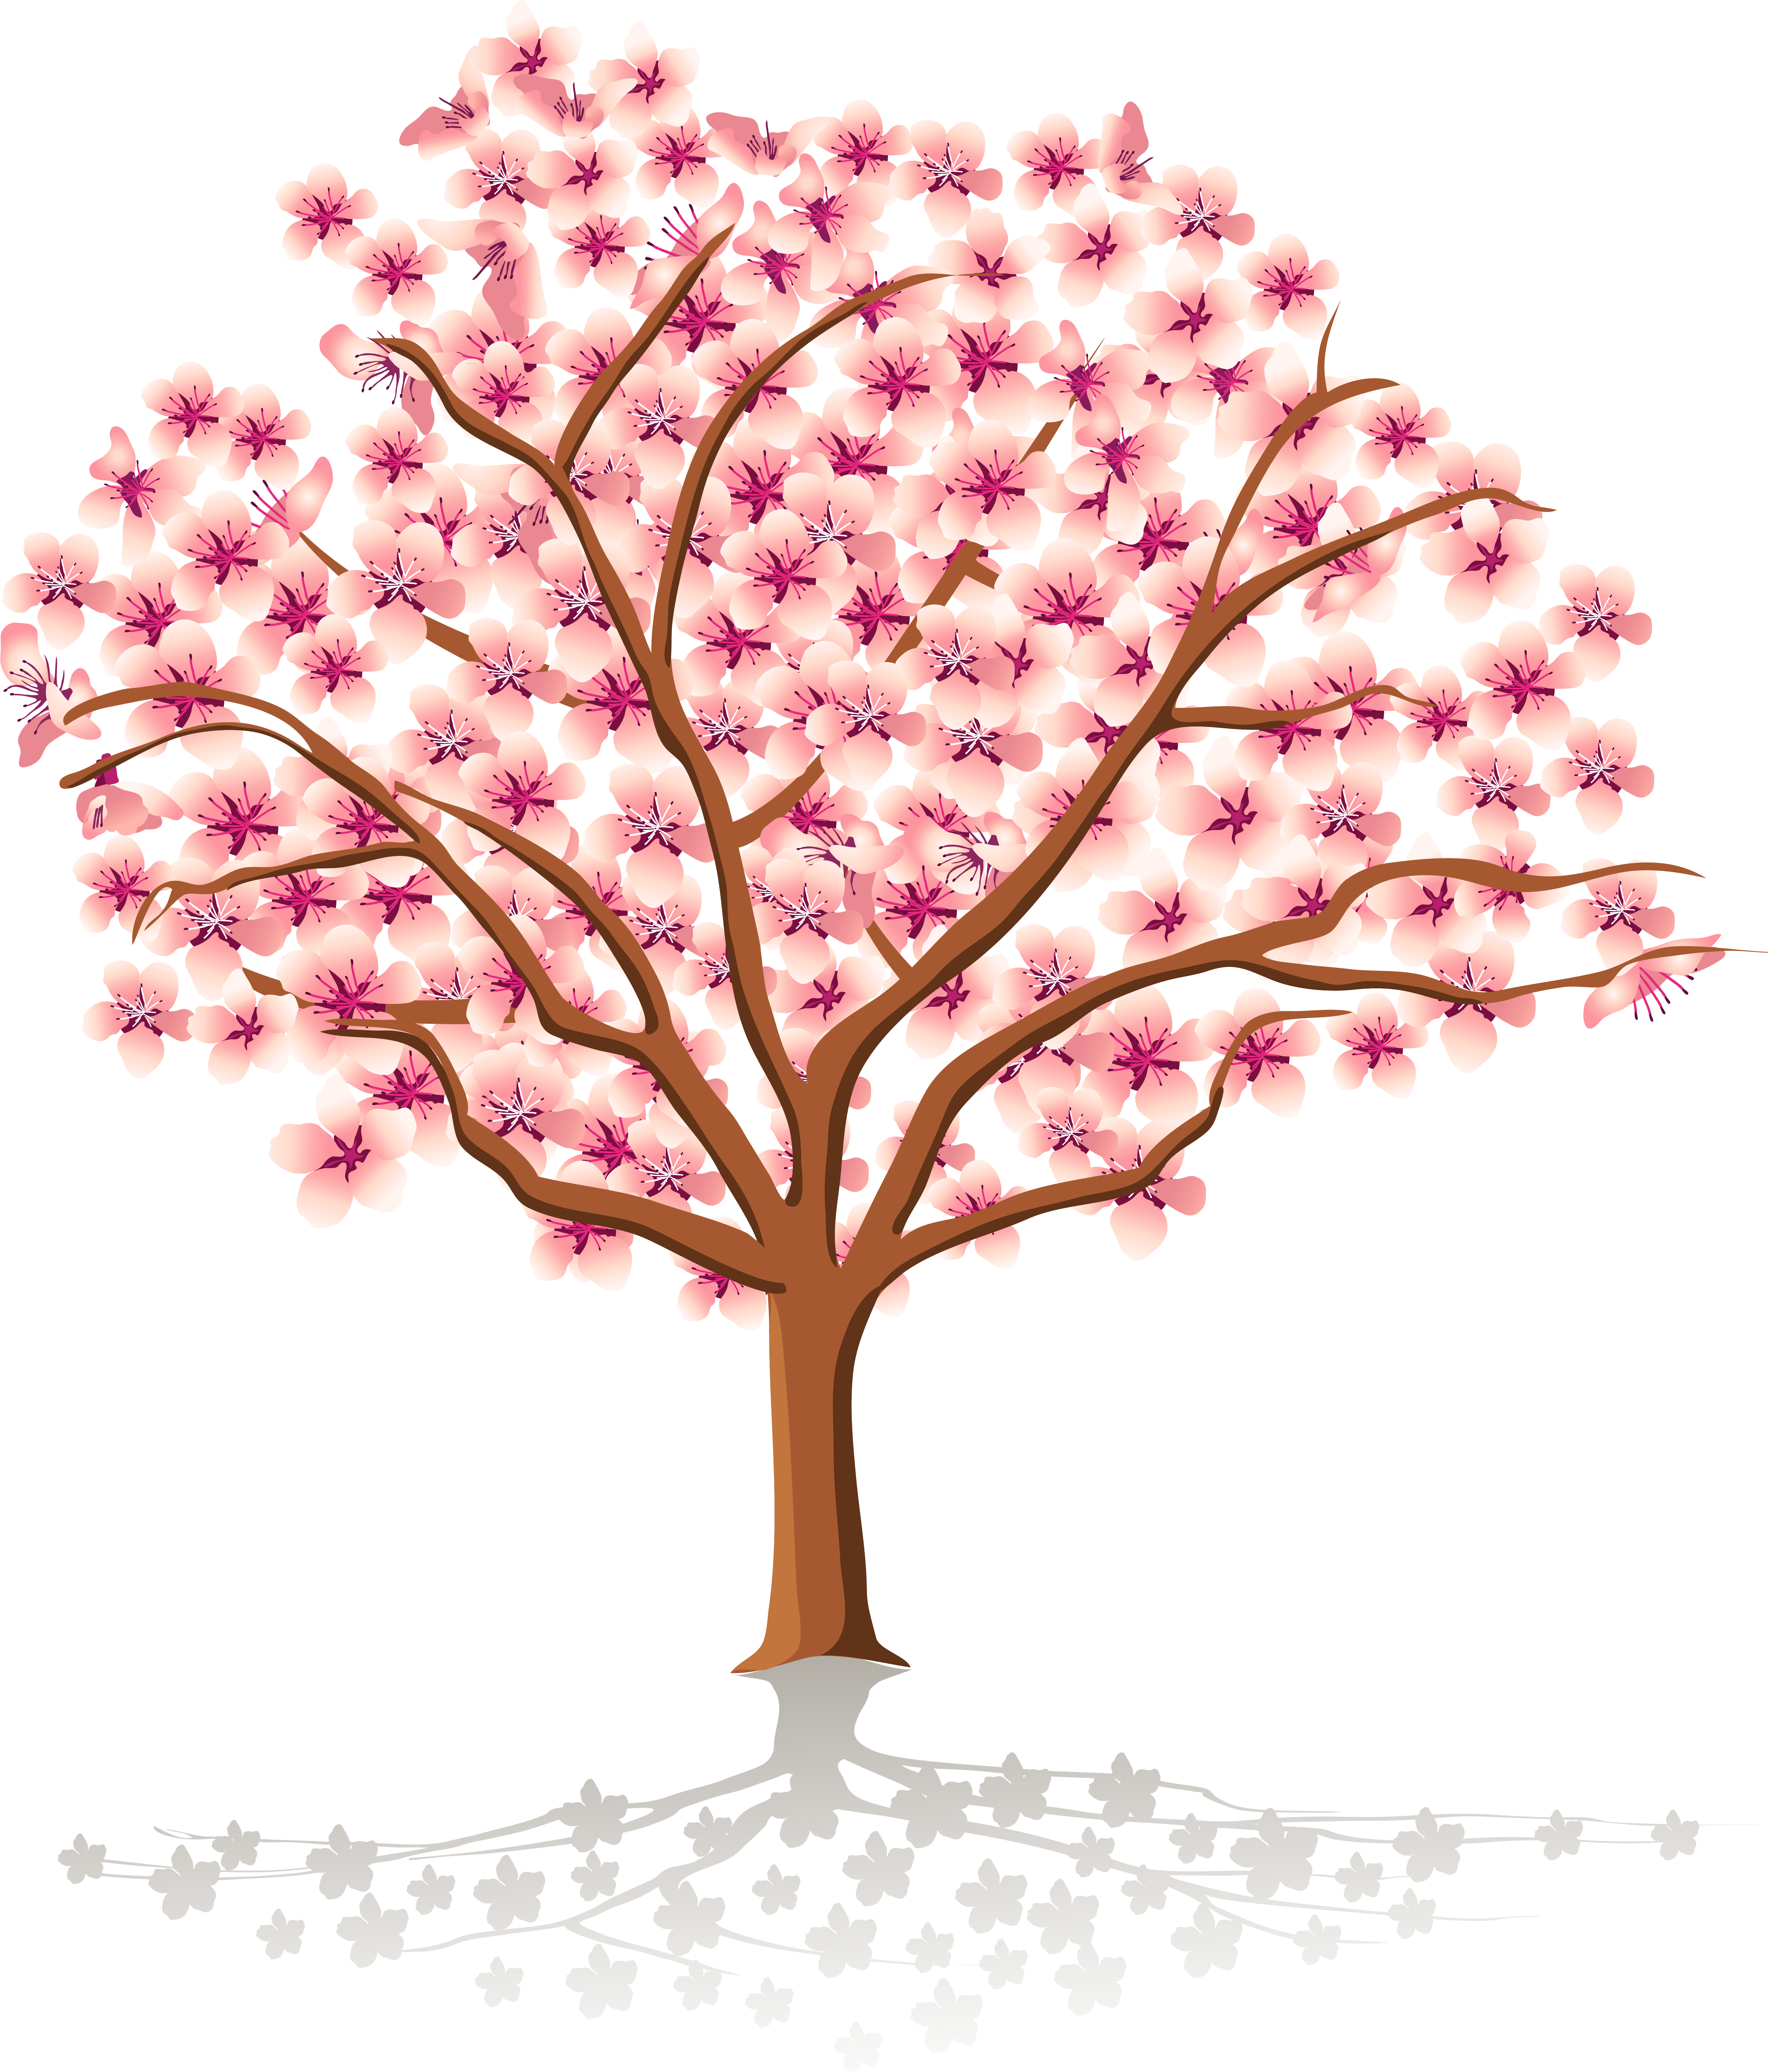 Transparent Spring Tree Png Clipart.